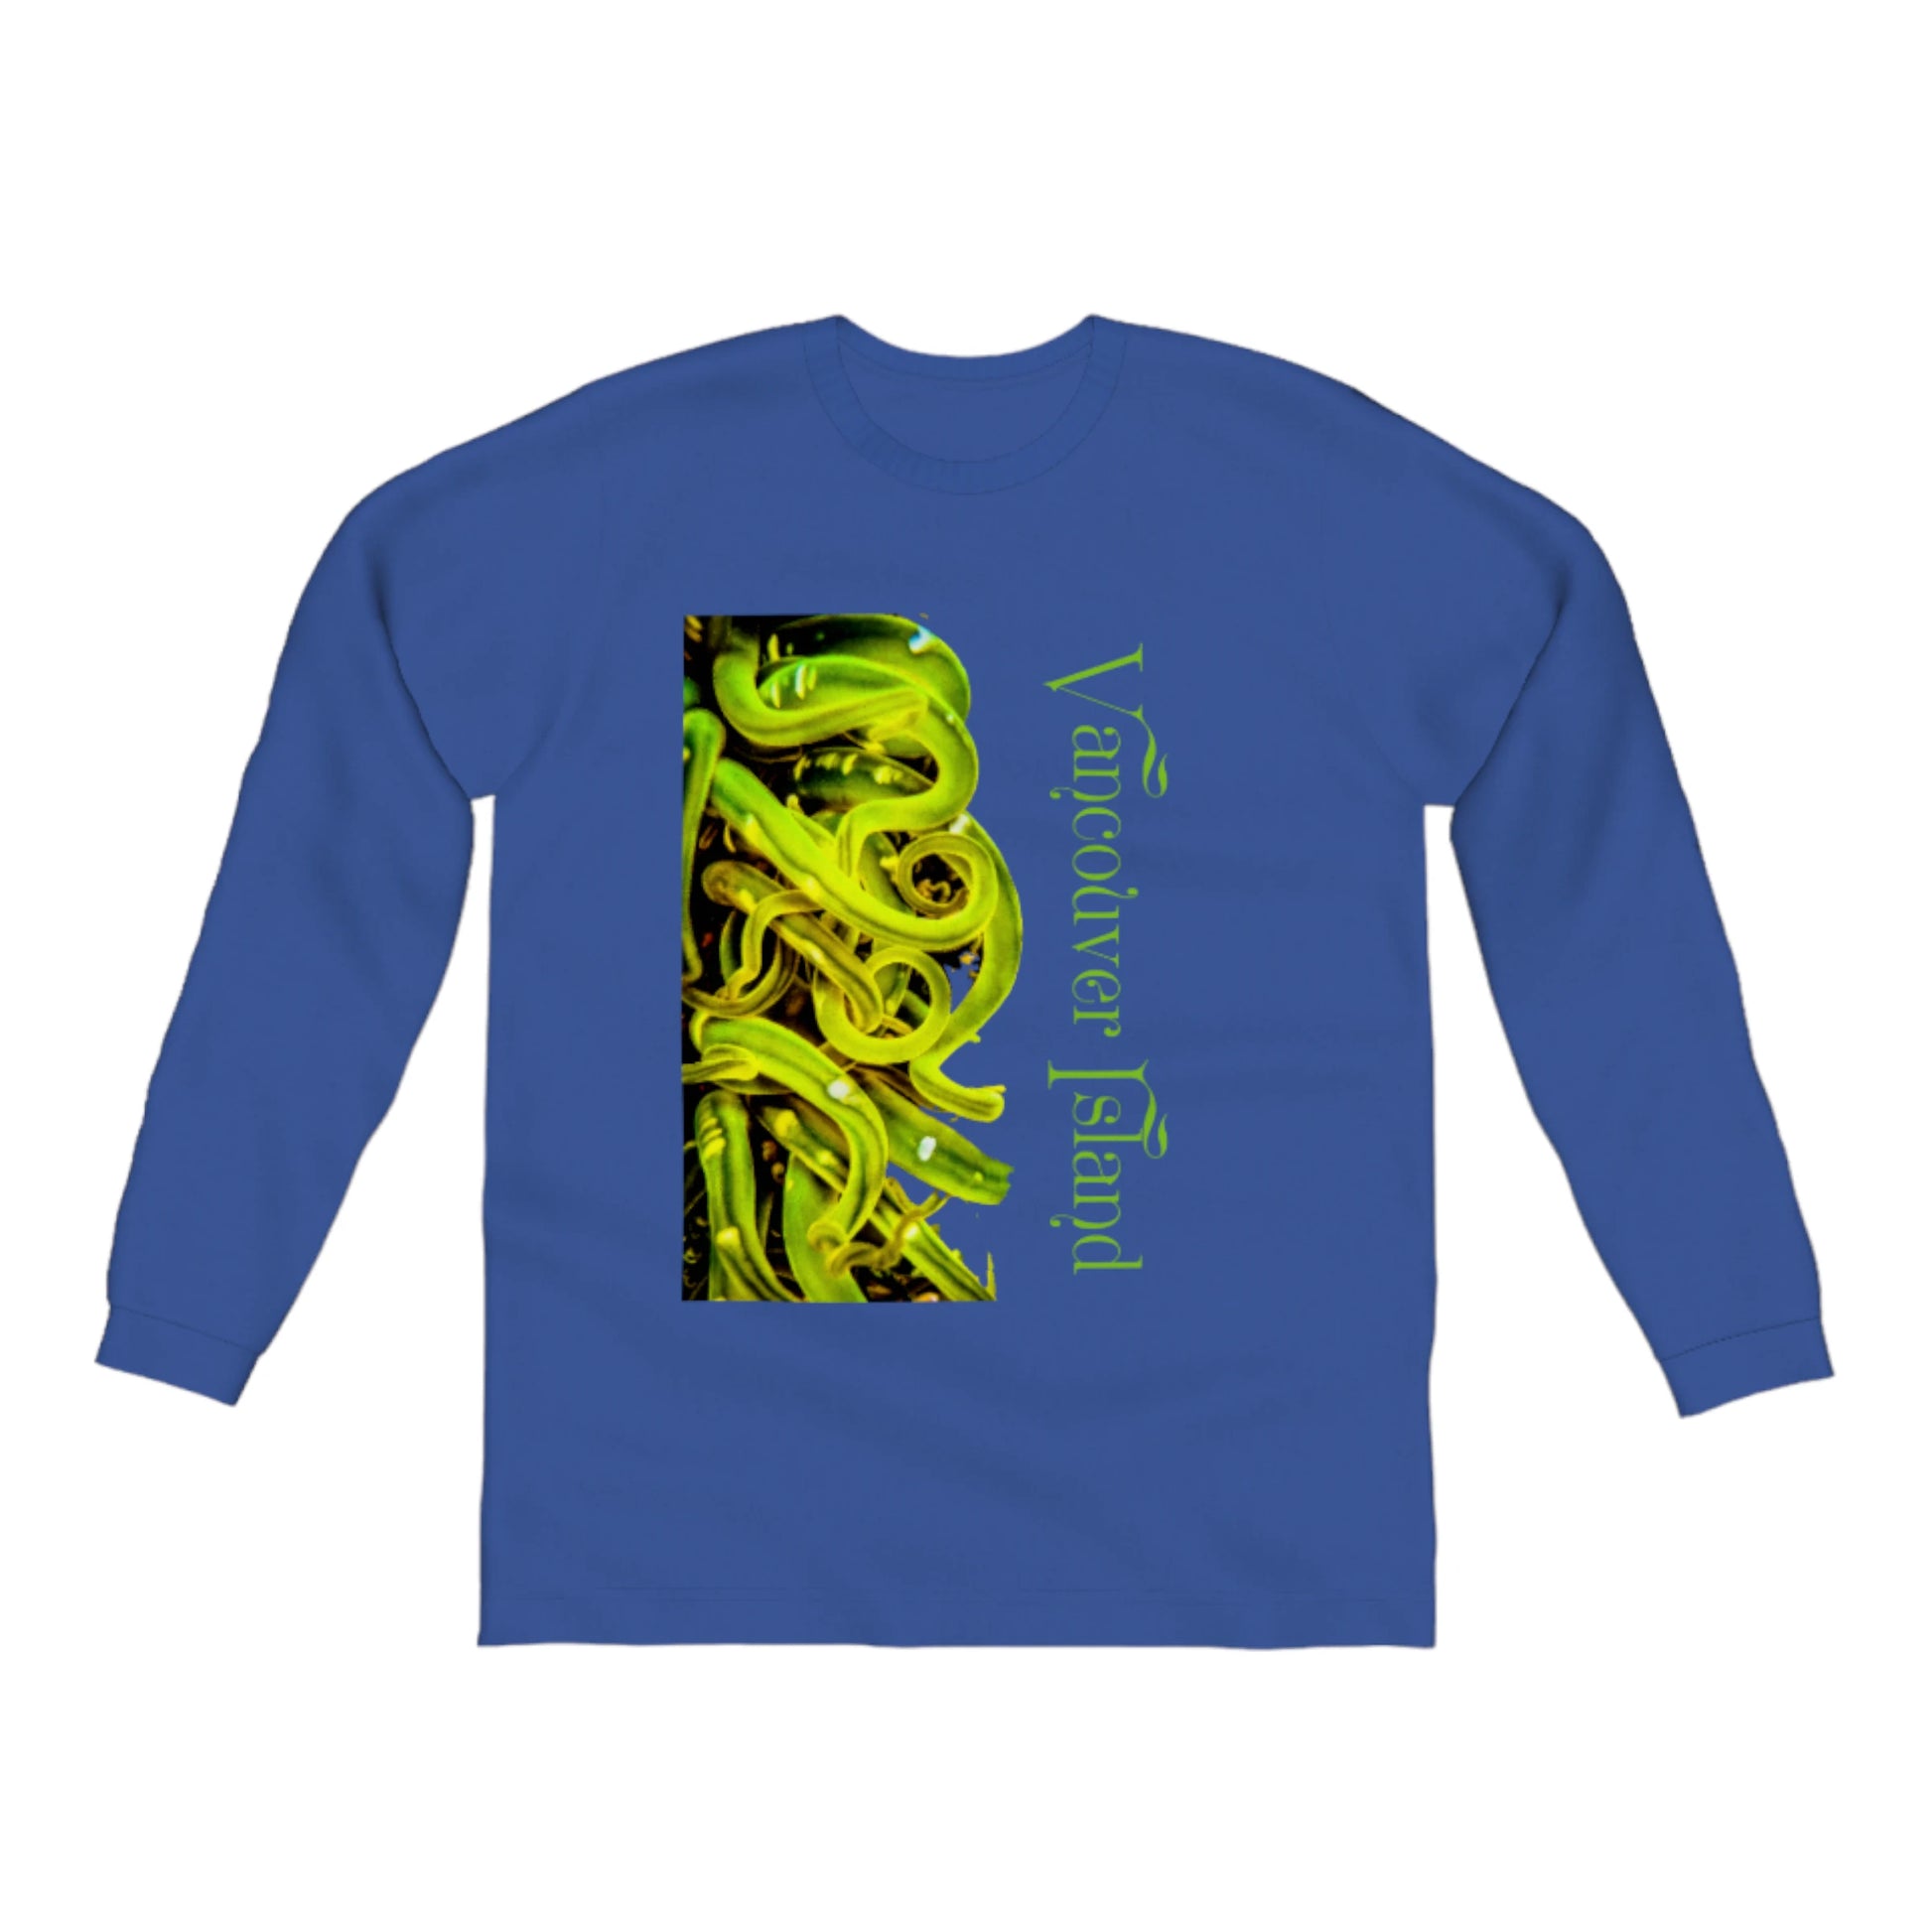 Vancouver Island Sea Anemone Comfort Long Sleeve Unisex T-Shirt. The image is of a green sea anemone with its tentacles swaying in the ocean water at low tide.  The words on the t shirt read Vancouver Island. by van isle goddess dot com